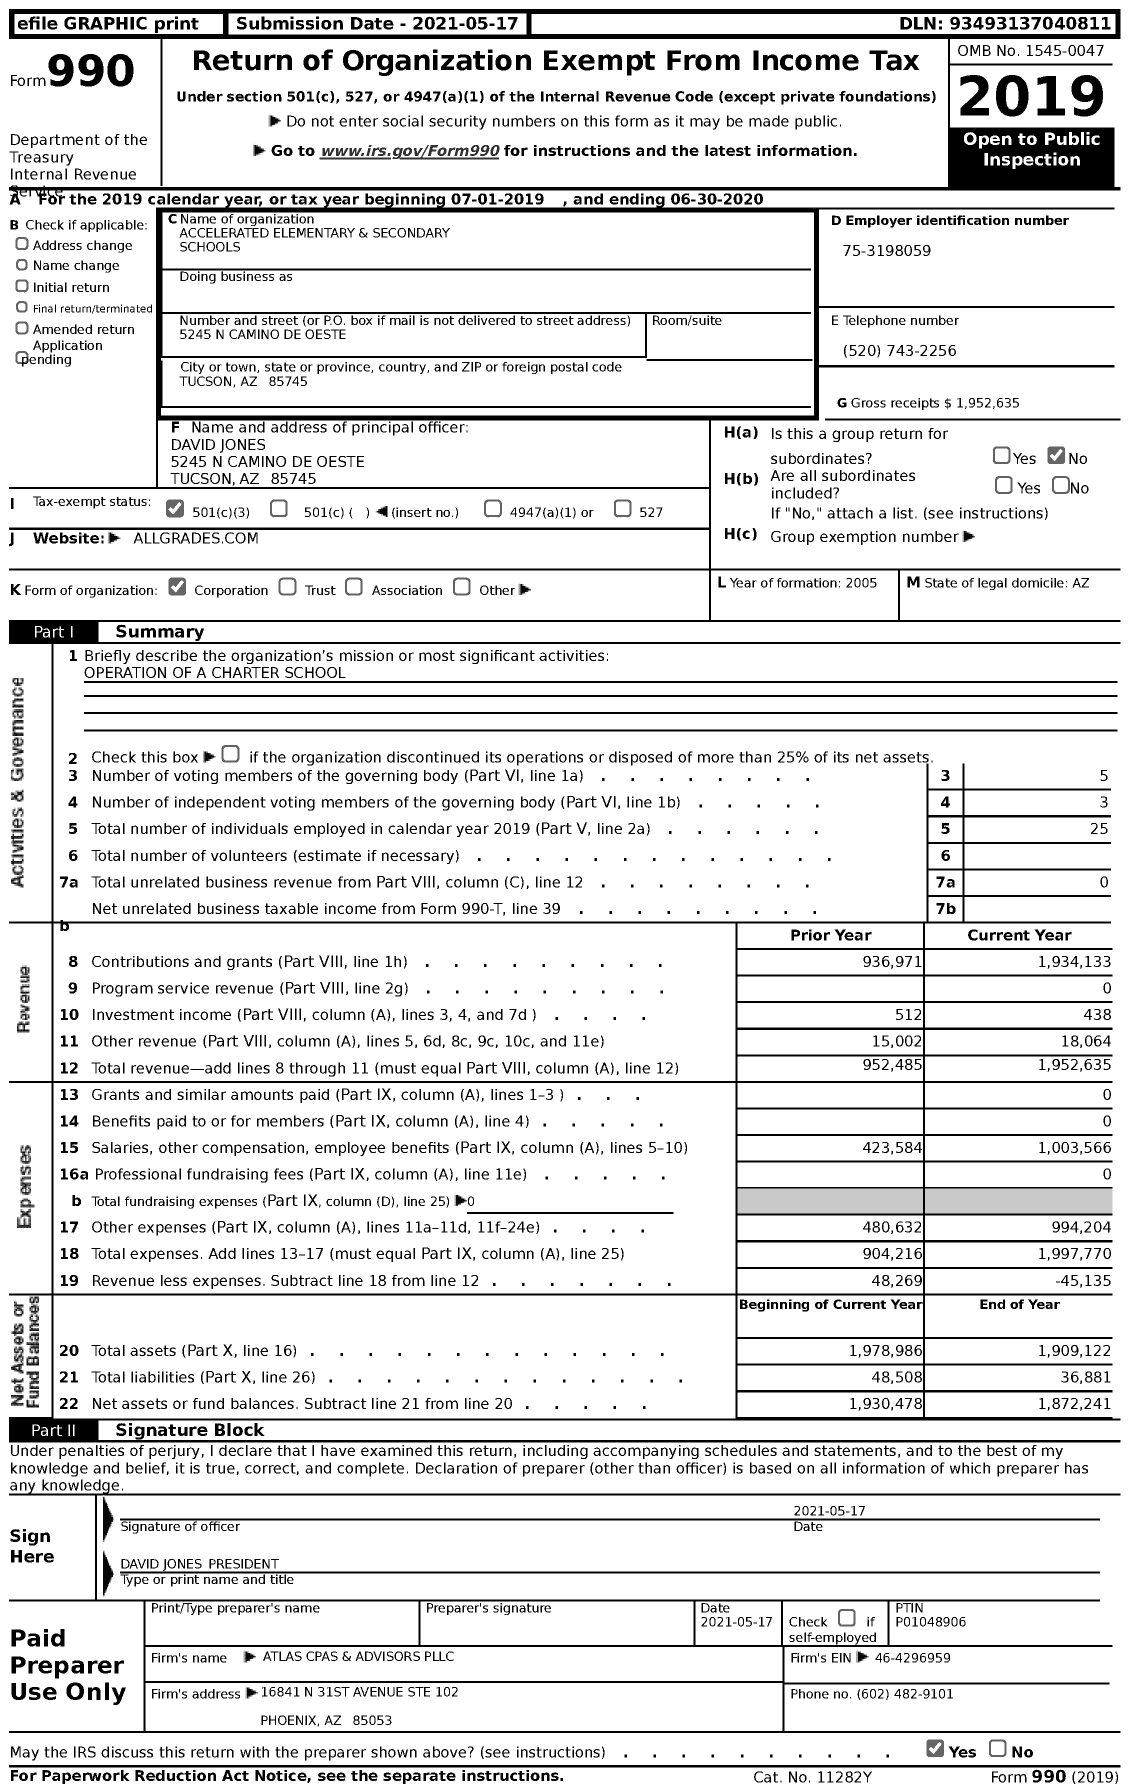 Image of first page of 2019 Form 990 for Accelerated Elementary and Secondary Schools